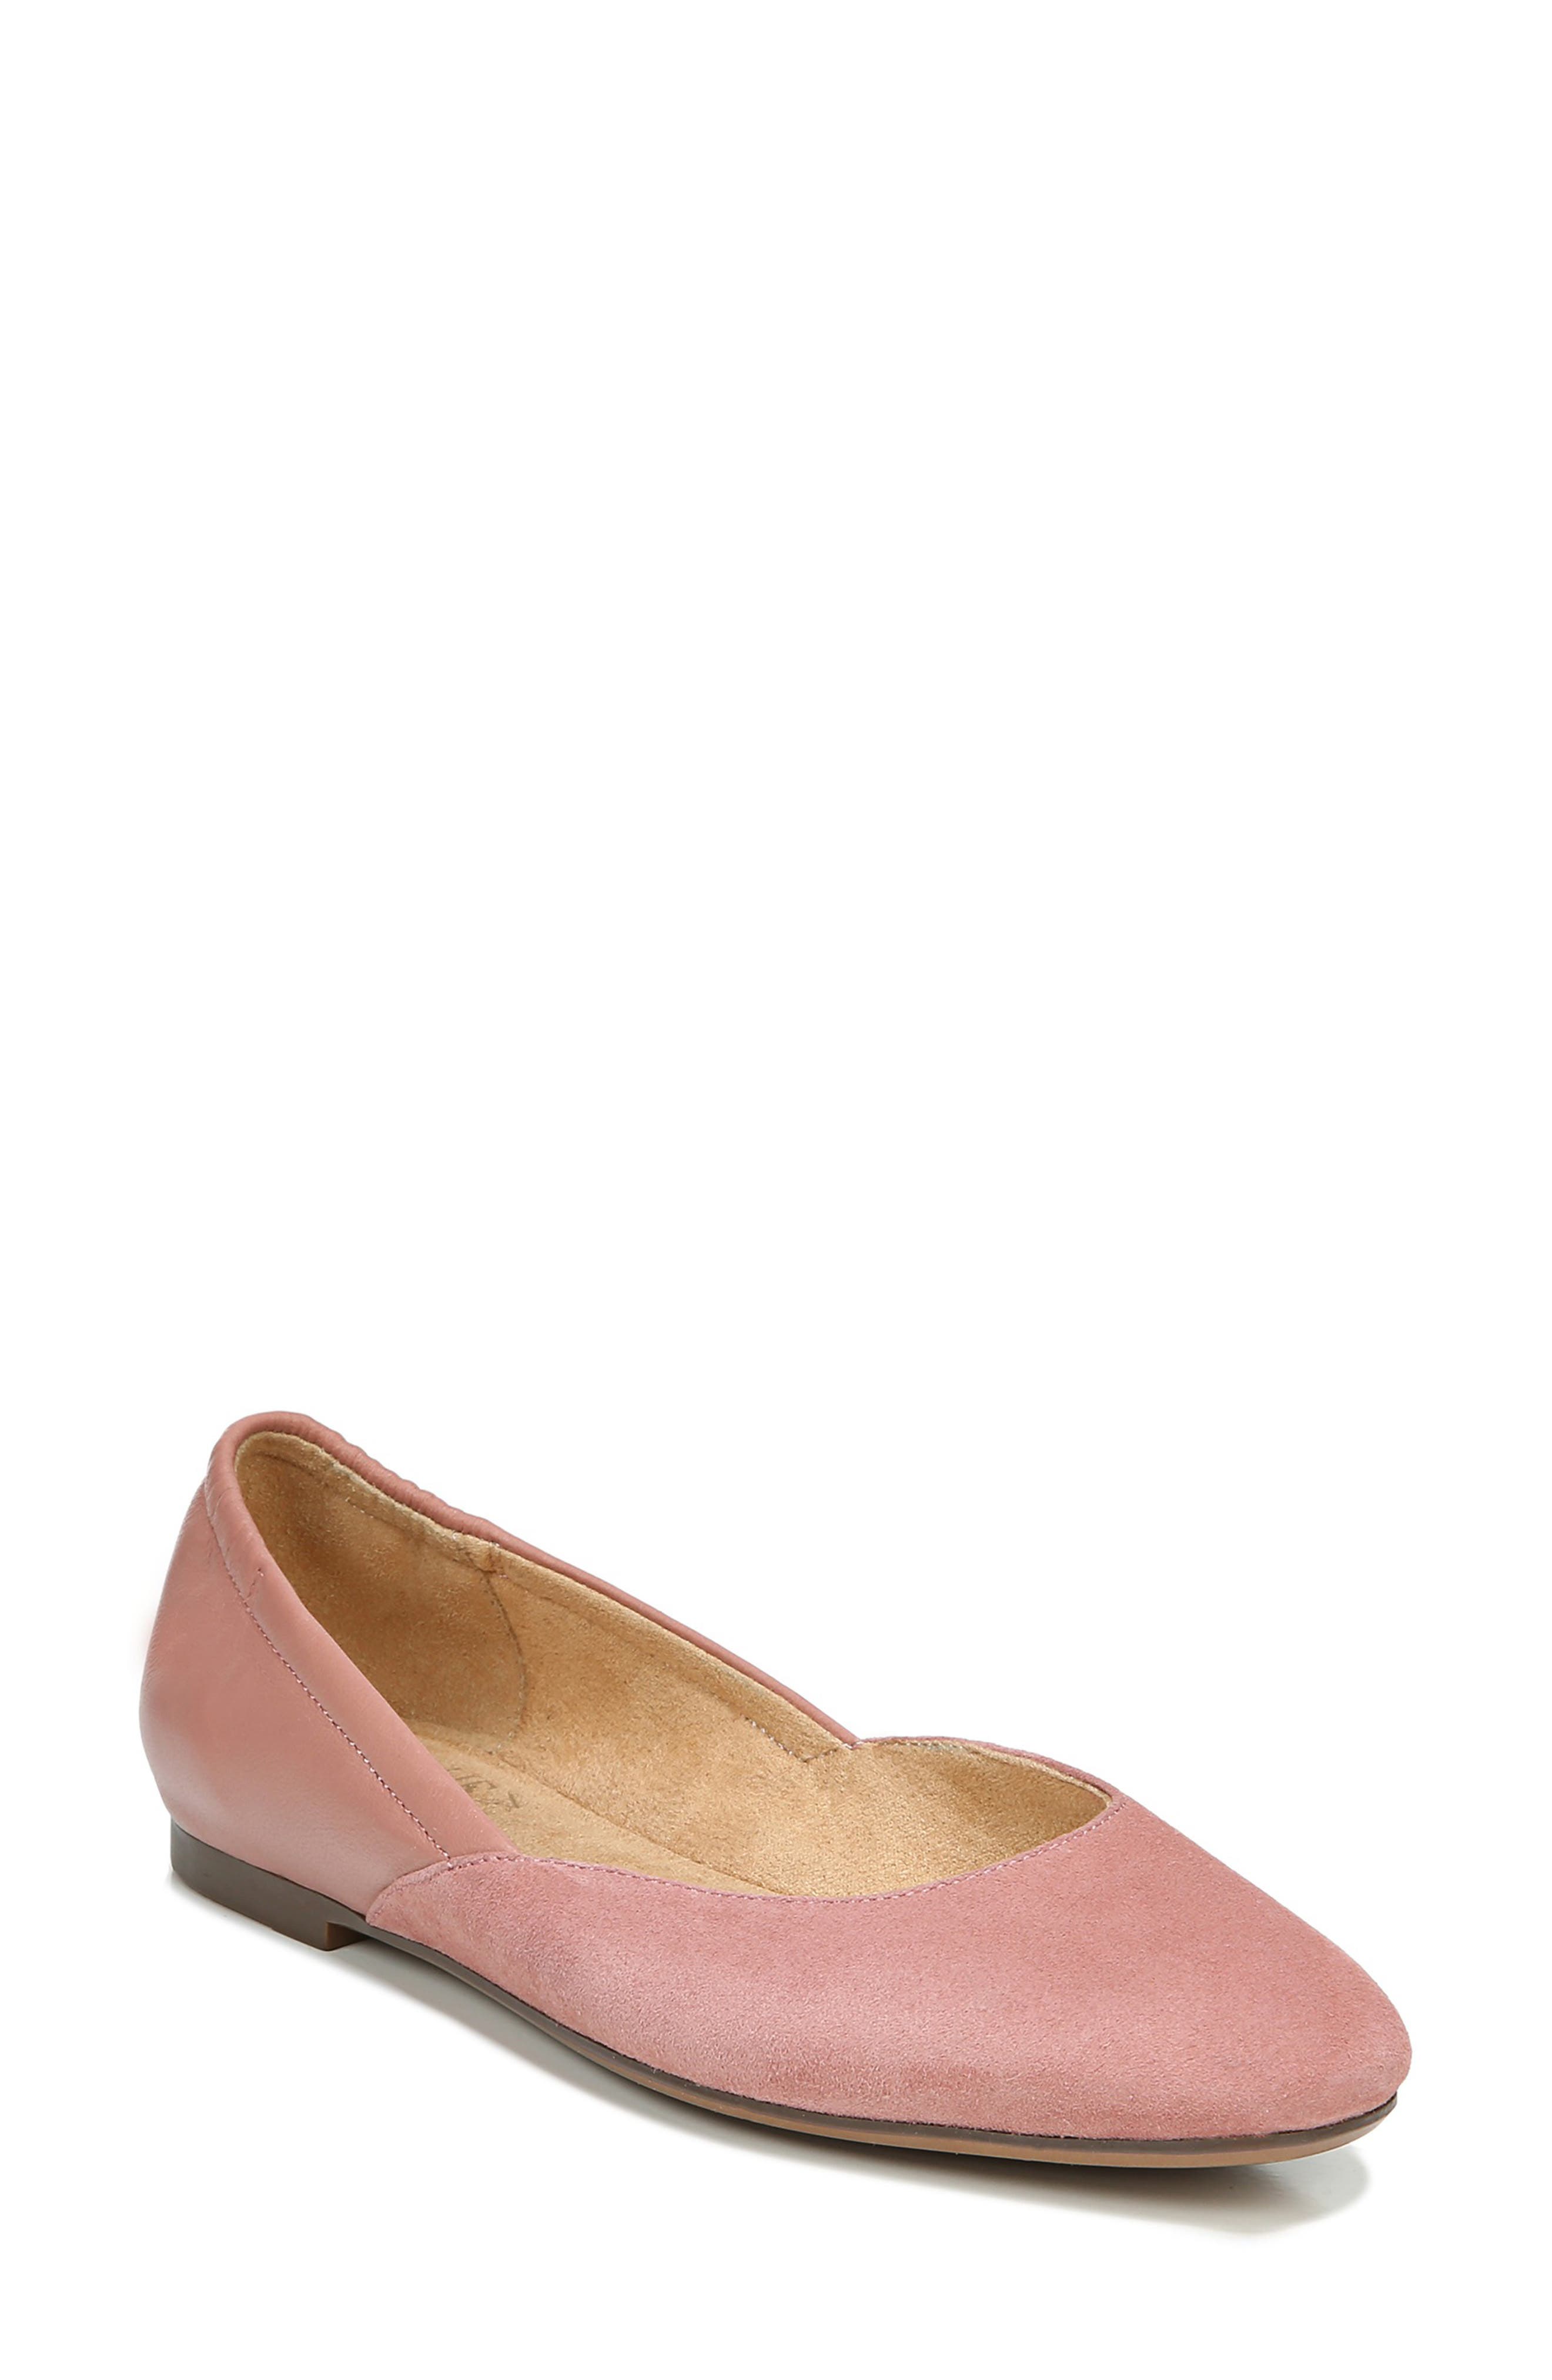 baby pink flats